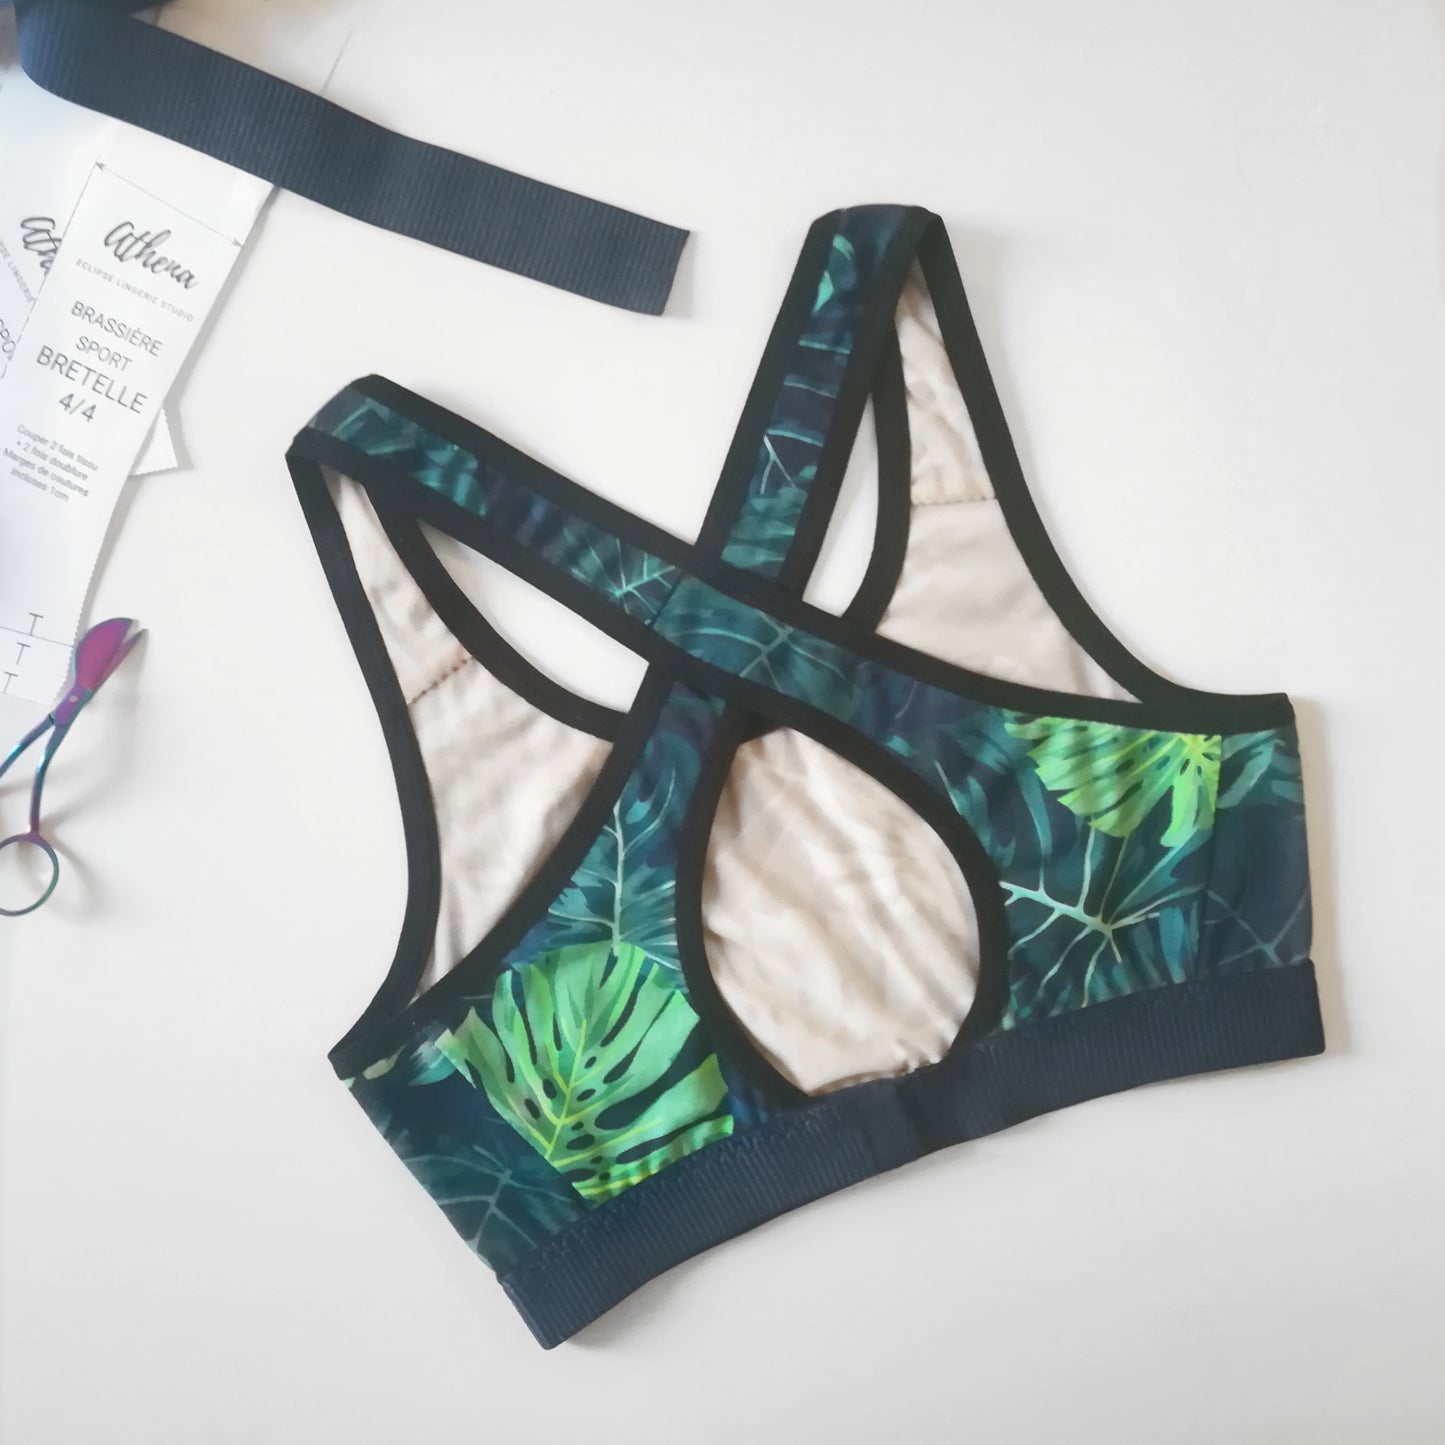 Athena, the sport bralette (french only) 